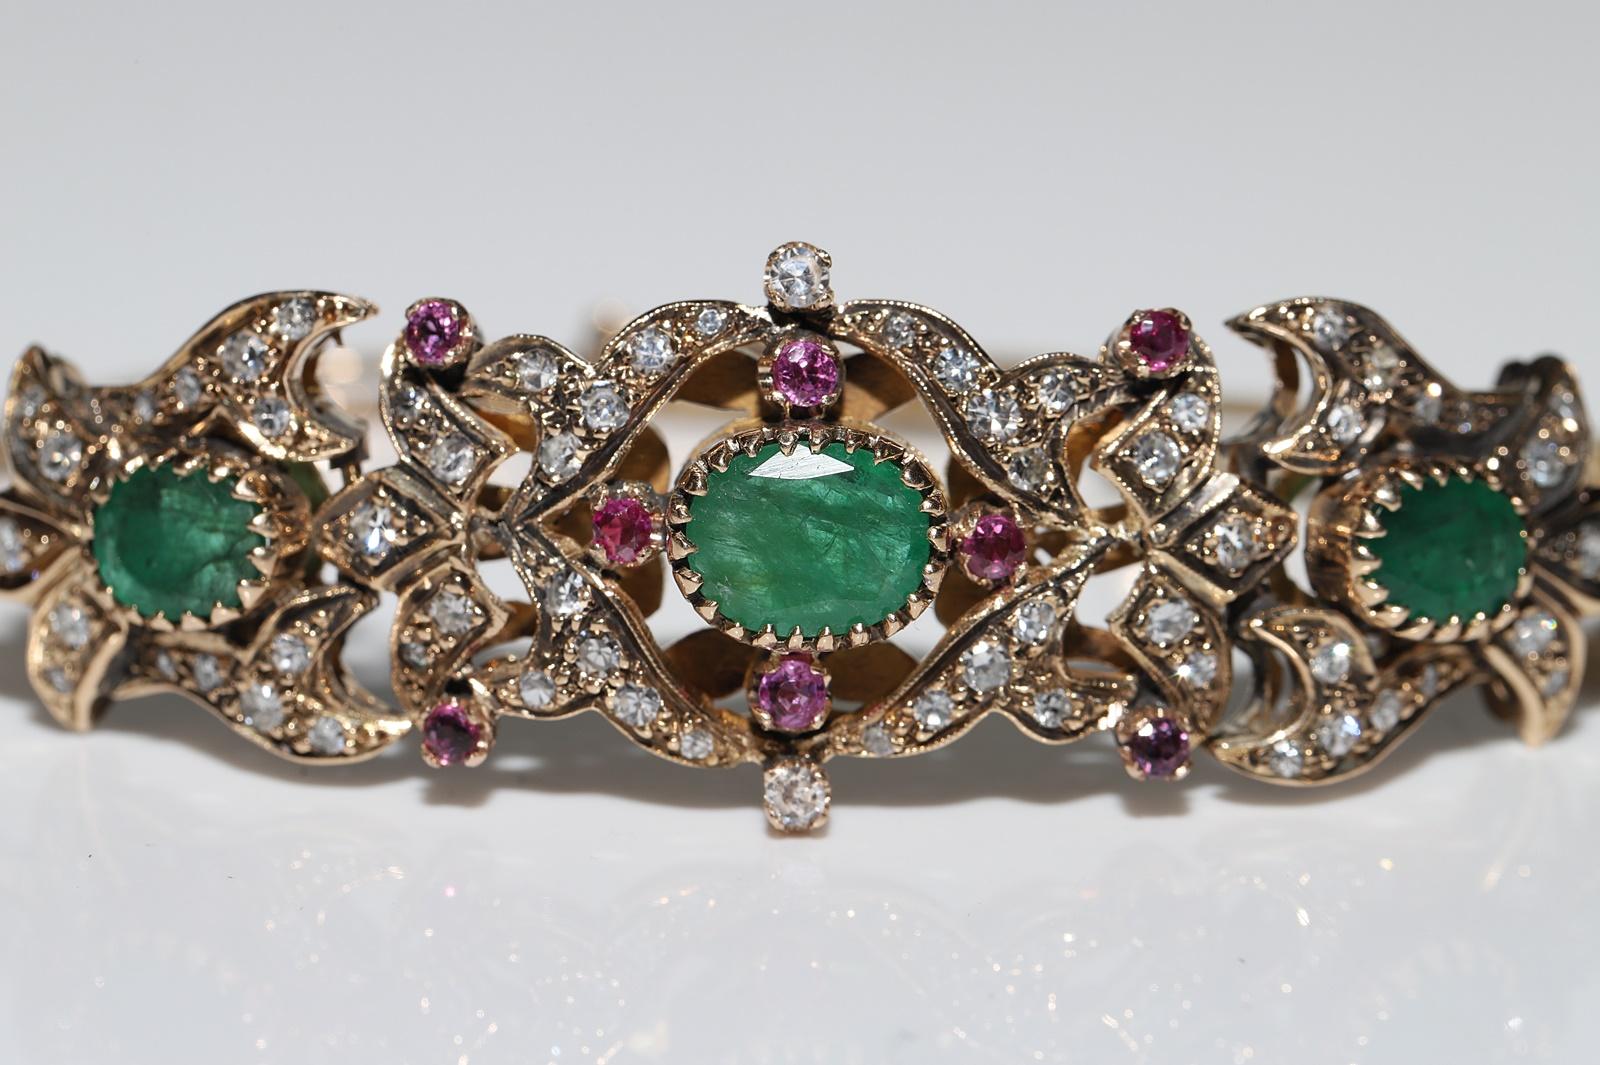 Vintage Circa 1960s 14k Gold Natural Diamond And Emerald And Ruby Bracelet For Sale 9